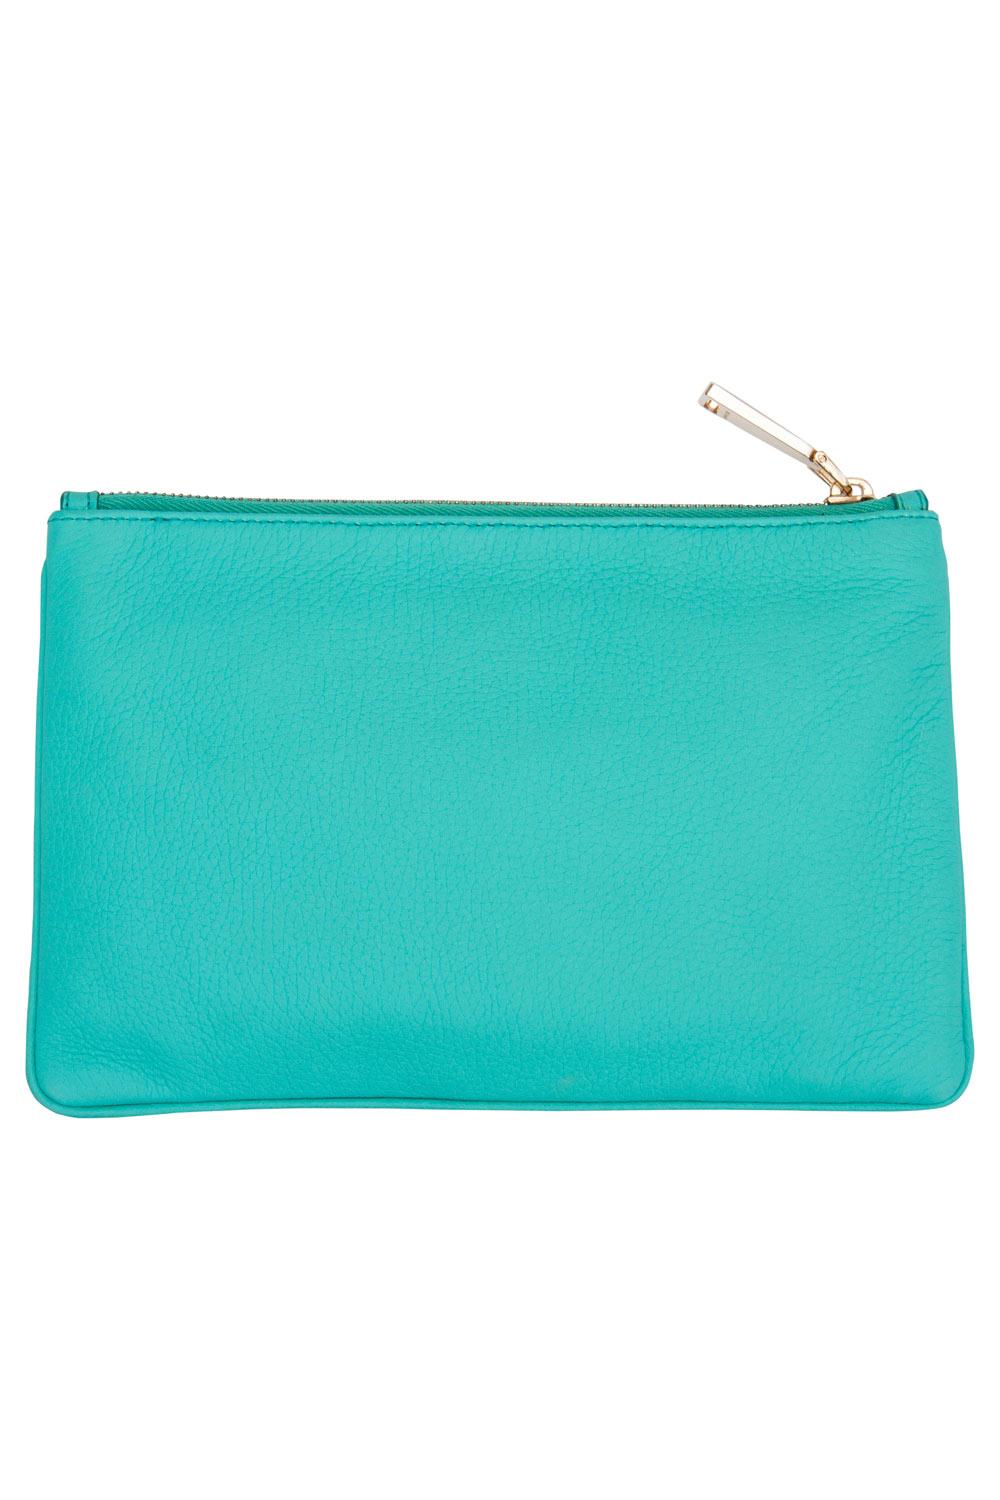 Made of leather, this pouch from Jil Sander is a creation worthy of being yours. It is designed in an aqua green shade and it has a zipper that leads to a fabric interior. The pouch is well-made and handy.

Includes: Original Dustbag

